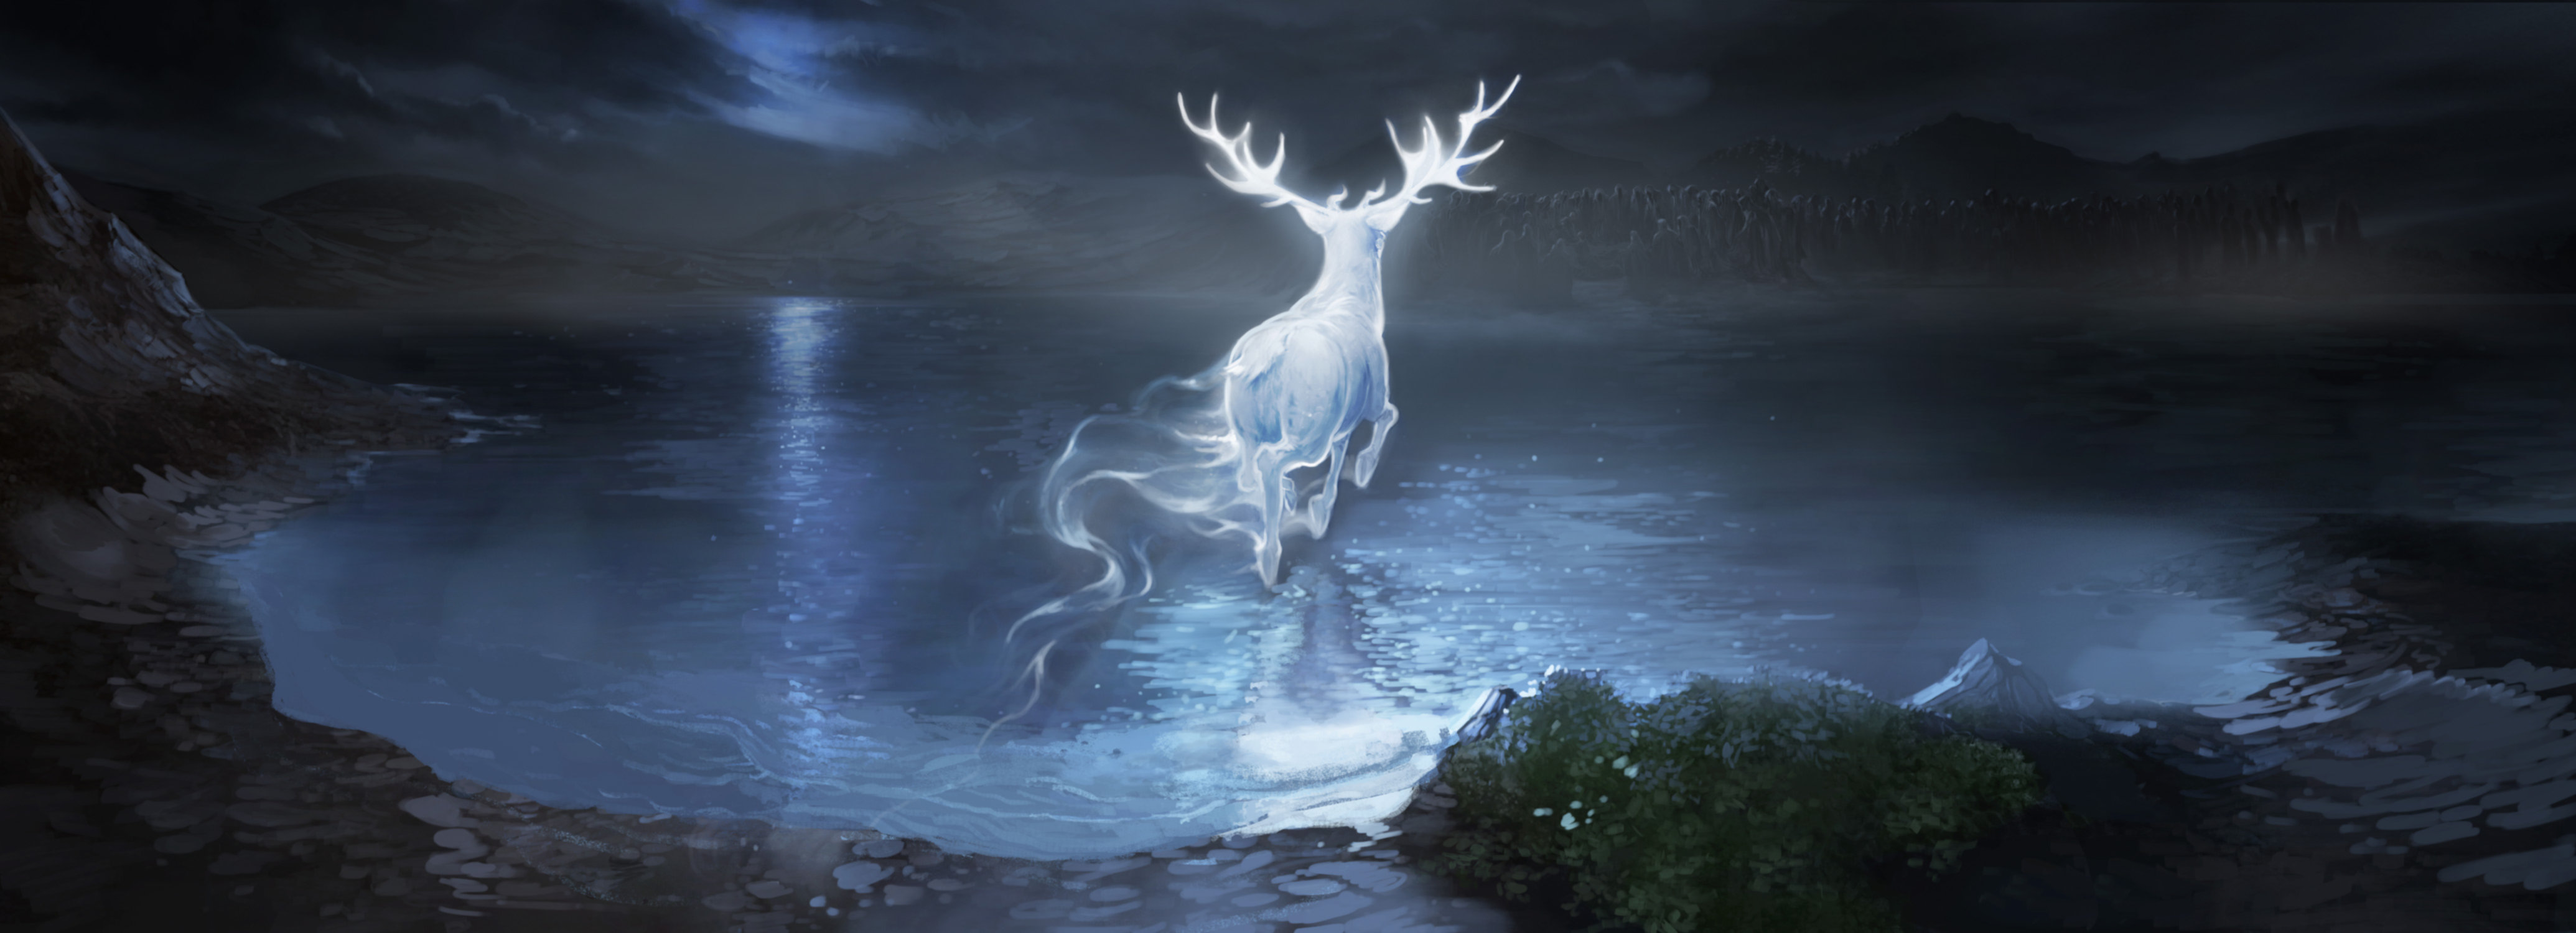 Prongs Saves Harry by Atomhawk